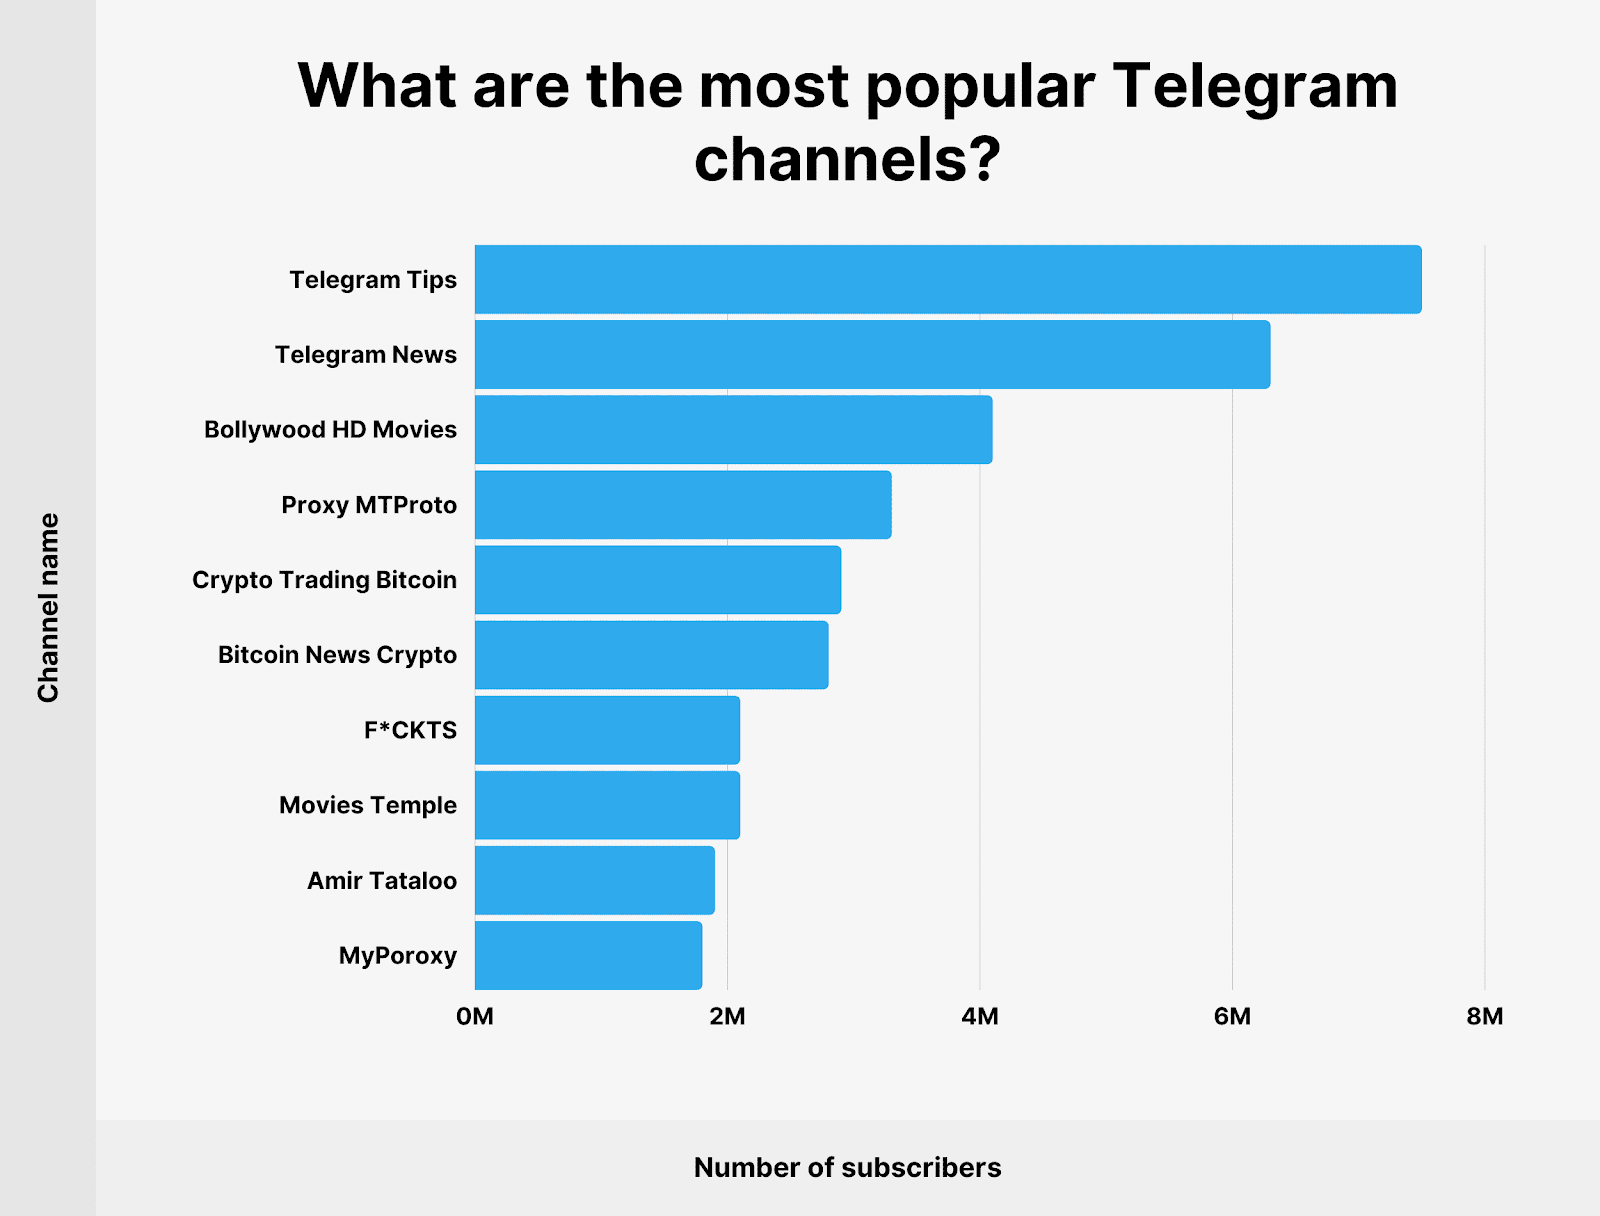 What are the most popular Telegram channels?